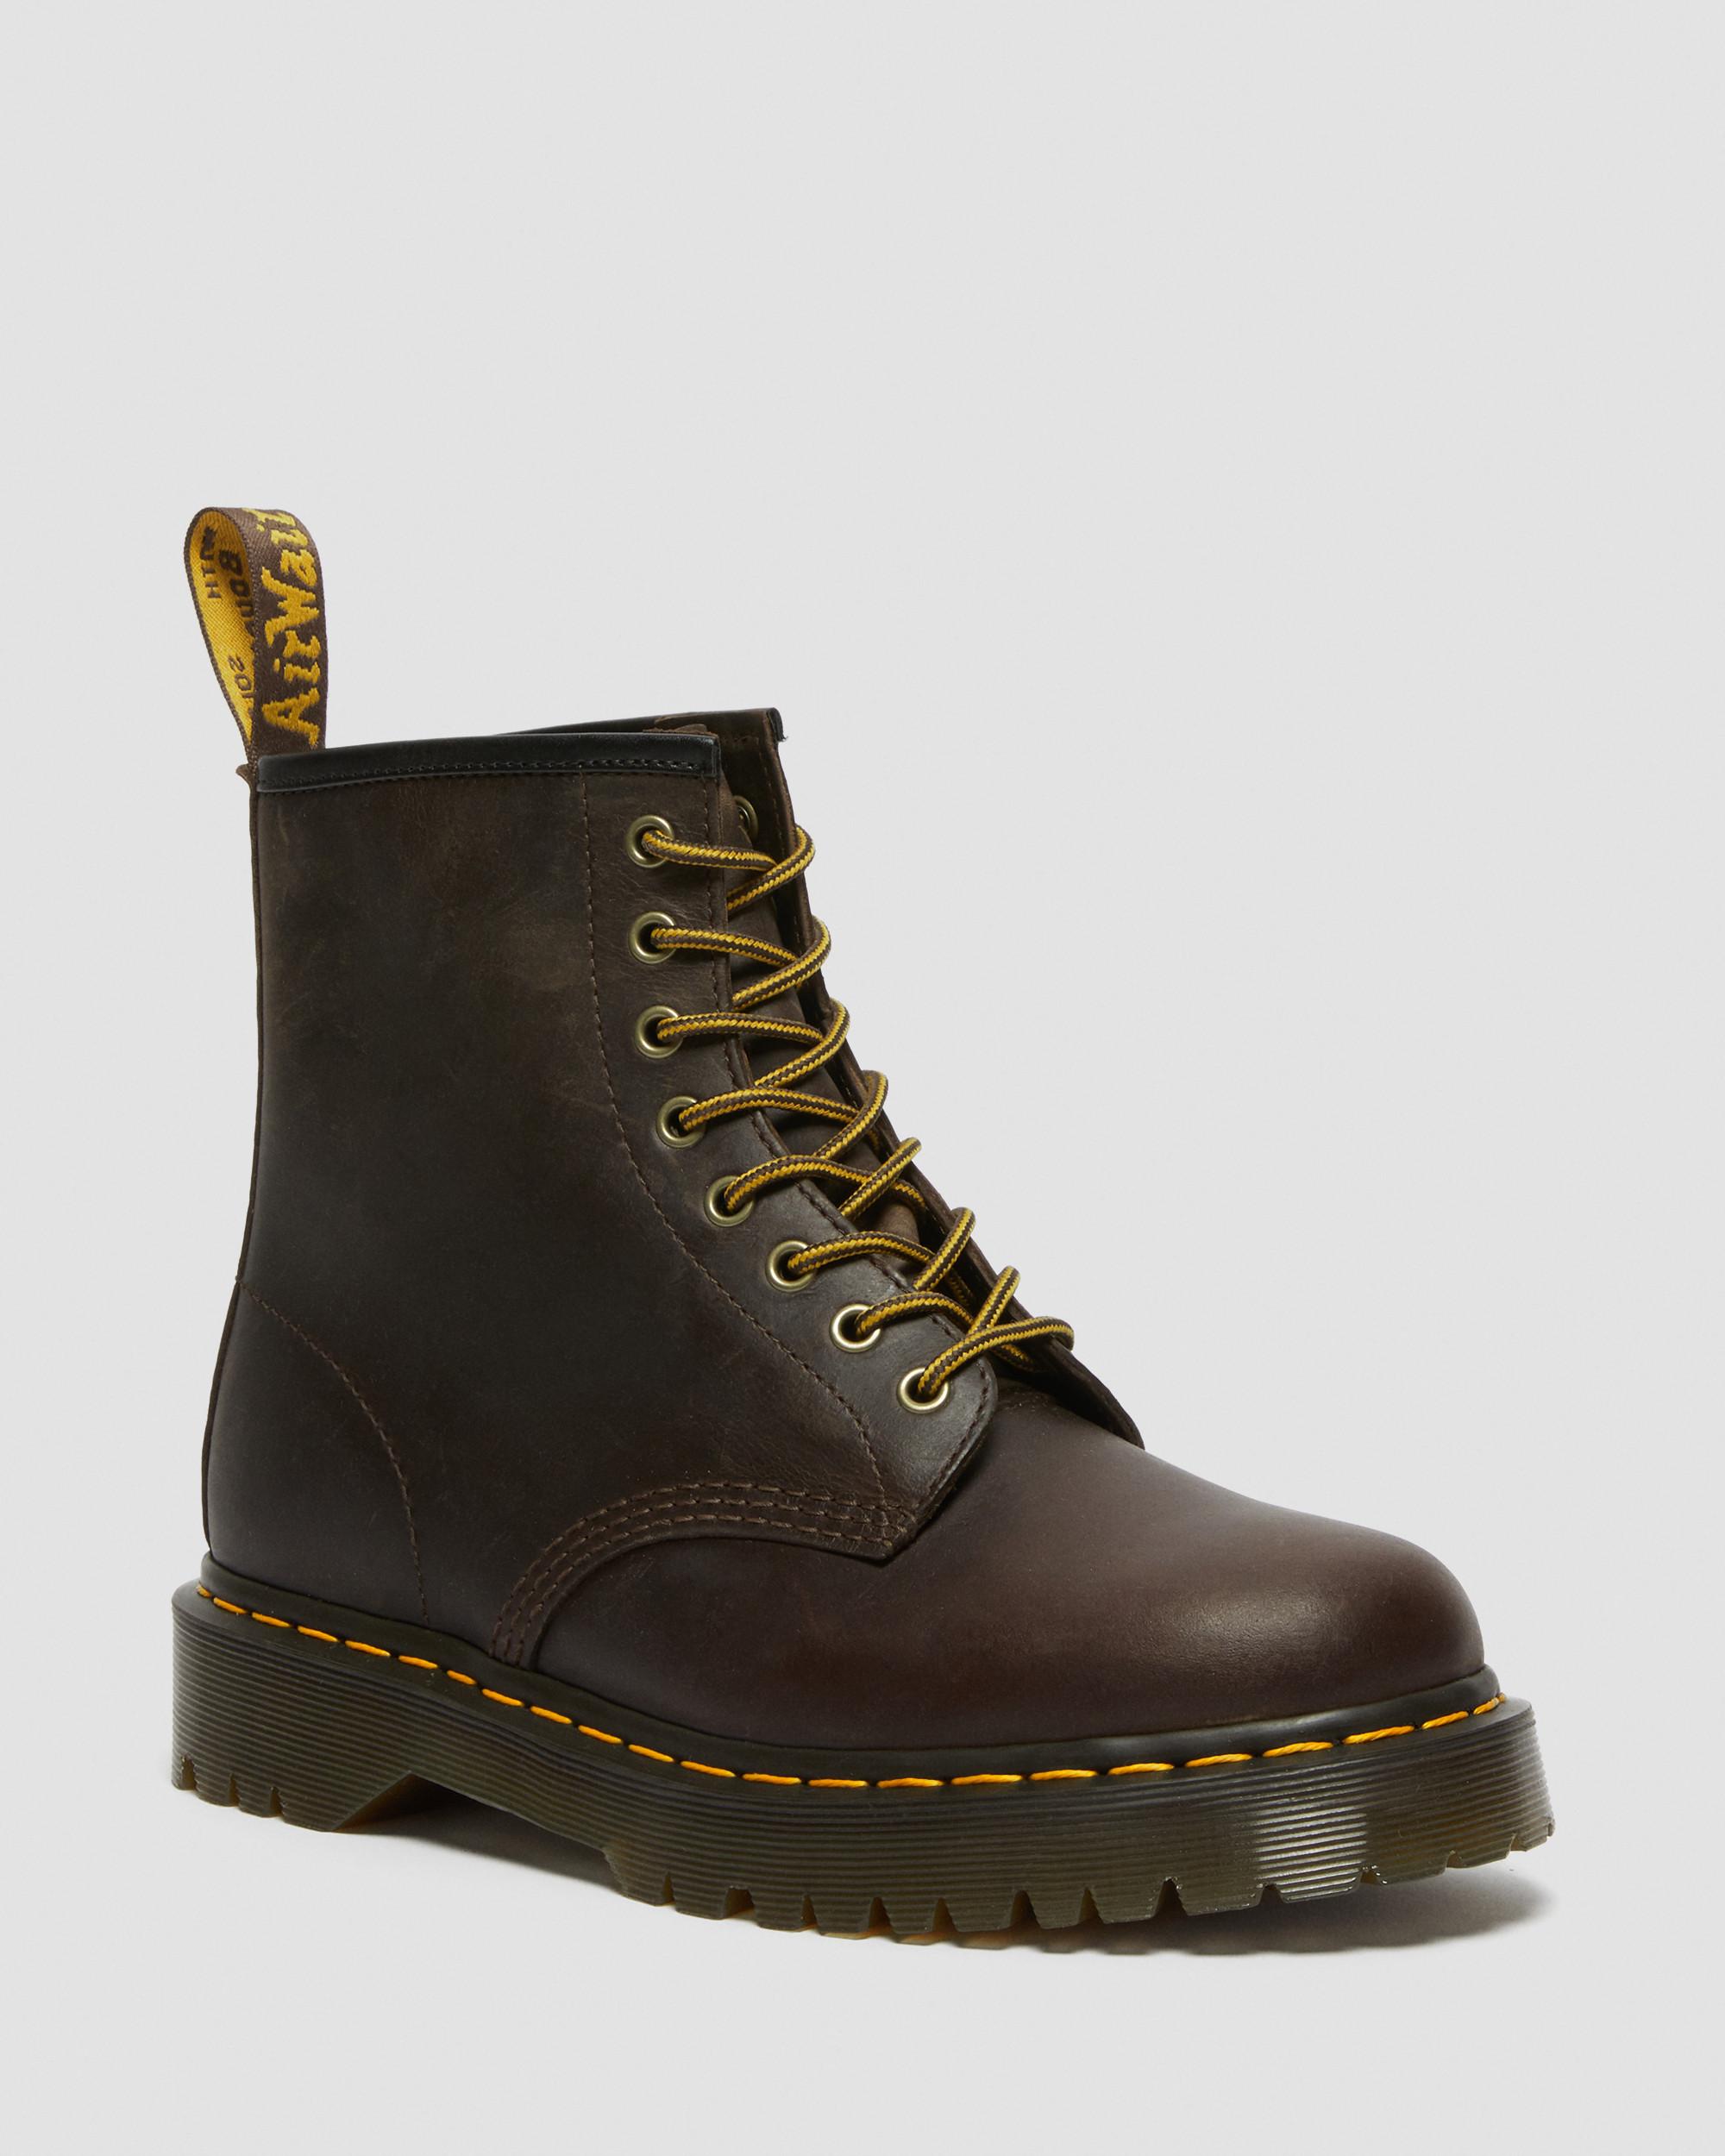 1460 Bex Crazy Horse Leather Lace Up Boots in Dark Brown | Dr. Martens